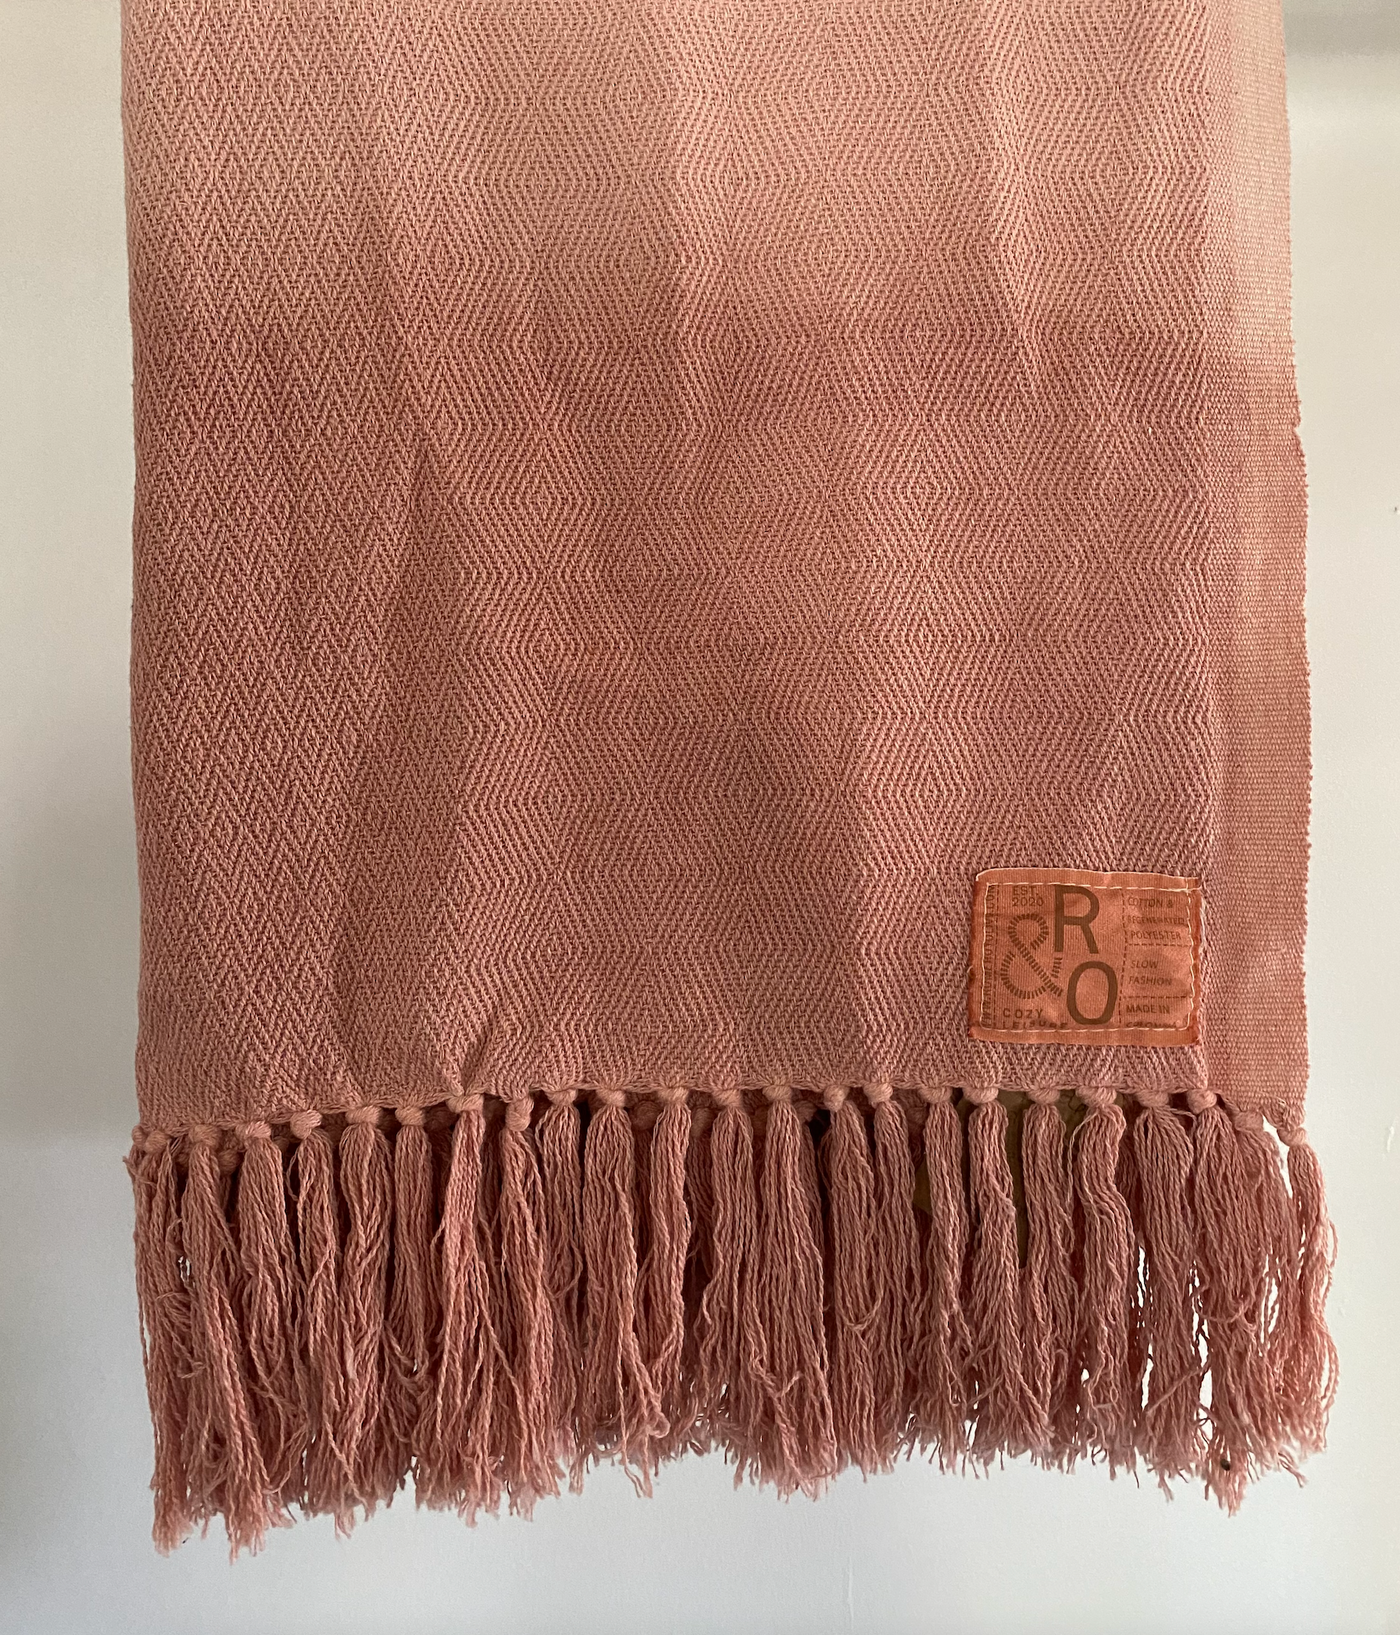 MOKANA KNITTED BLANKET HAND DYED - Pink/Off-white